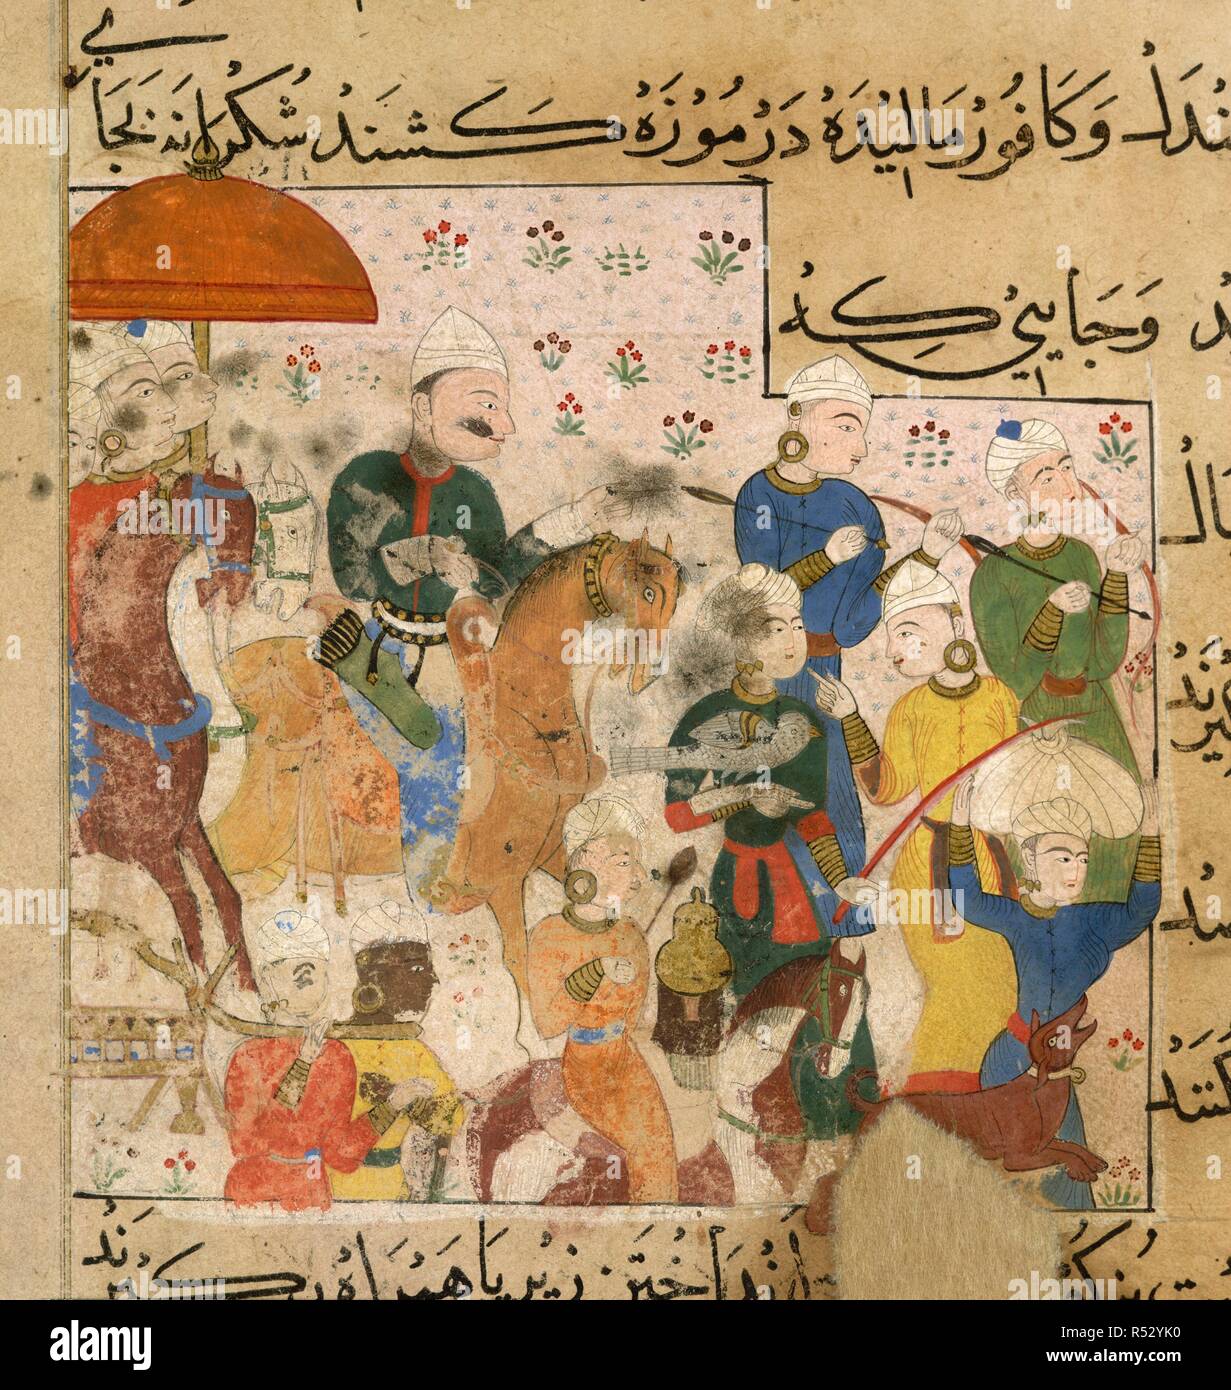 Hunting. The Ni'matnama-i Nasir al-Din Shah. A manuscript o. 1495 - 1505. Sultan Ghiyath al-Din going out hunting with the necessities. Ghiyath Shahi on a hunting expedition escorted by his throne bearers, arms bearers, falconer and mounted attendants. The horses are reminiscent of the raw-boned animals seen in Shiraz paintings of the 1430s. This section is concerned with advice for provisions and tactics used when hunting. Opaque watercolour. Sultanate style.  Image taken from The Ni'matnama-i Nasir al-Din Shah. A manuscript on Indian cookery and the preparation of sweetmeats, spices etc.  Or Stock Photo